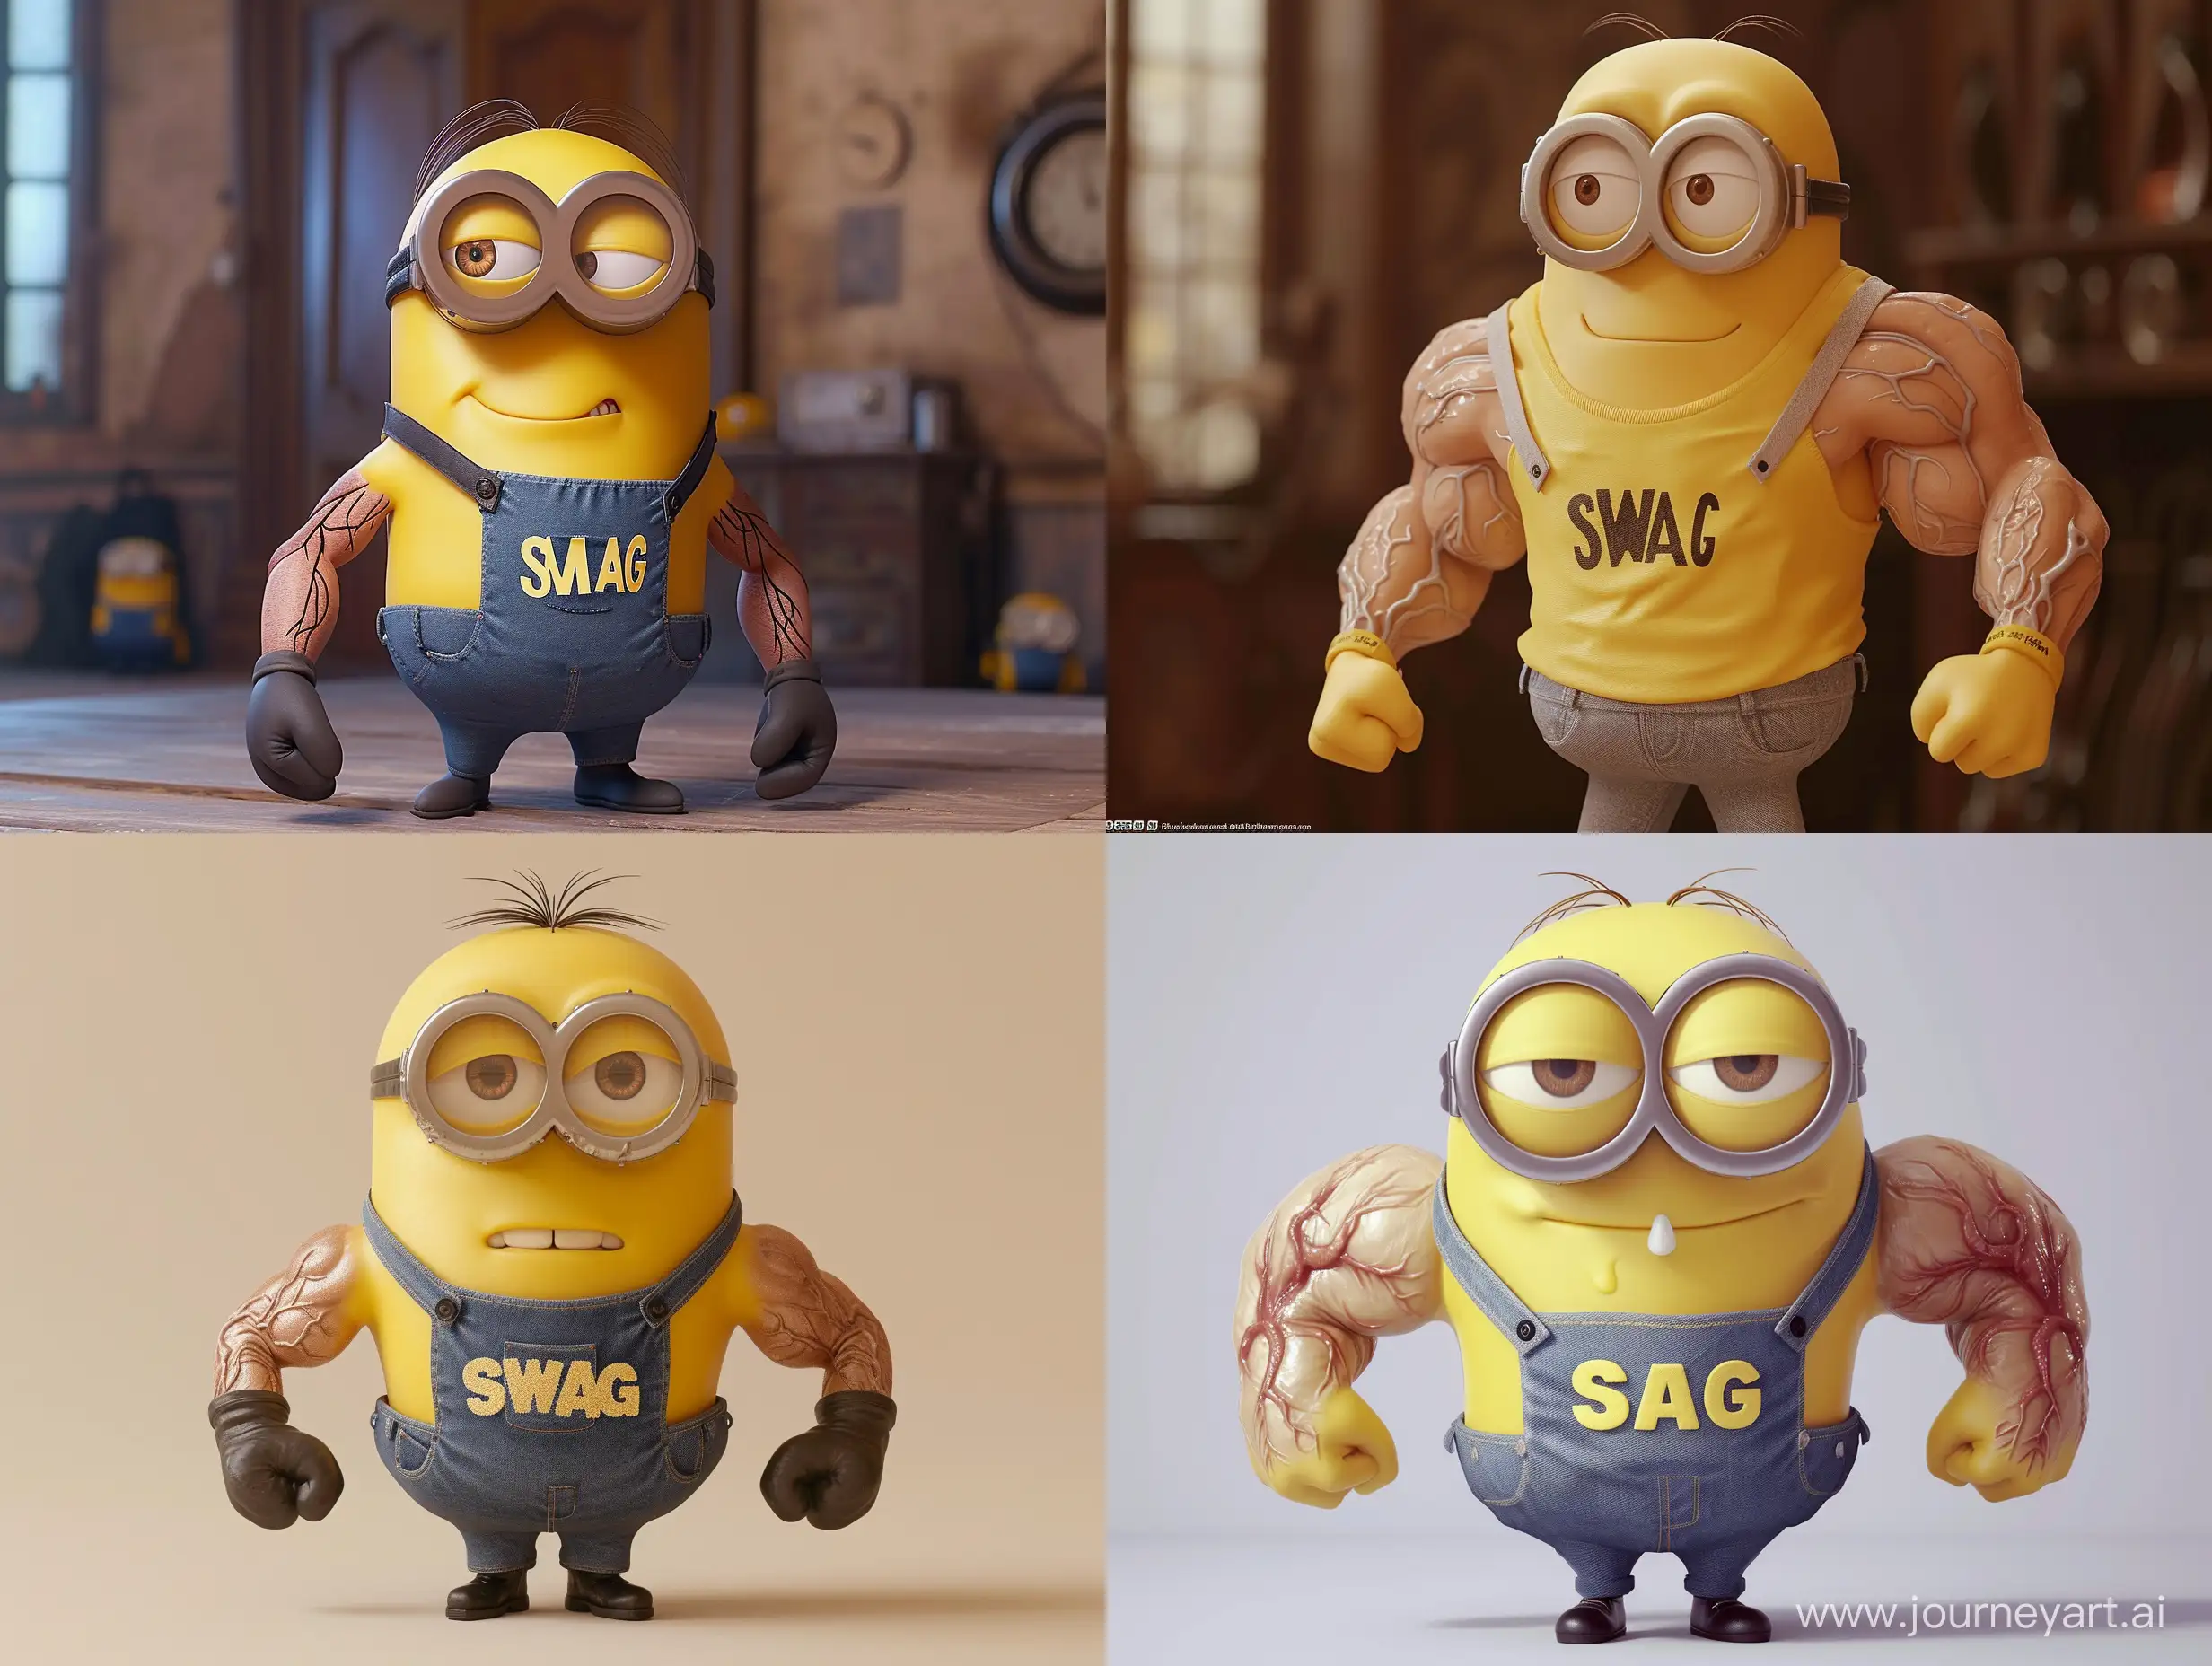 Swaggering-Minion-in-Despicable-Me-Tshirt-with-Muscular-Veins